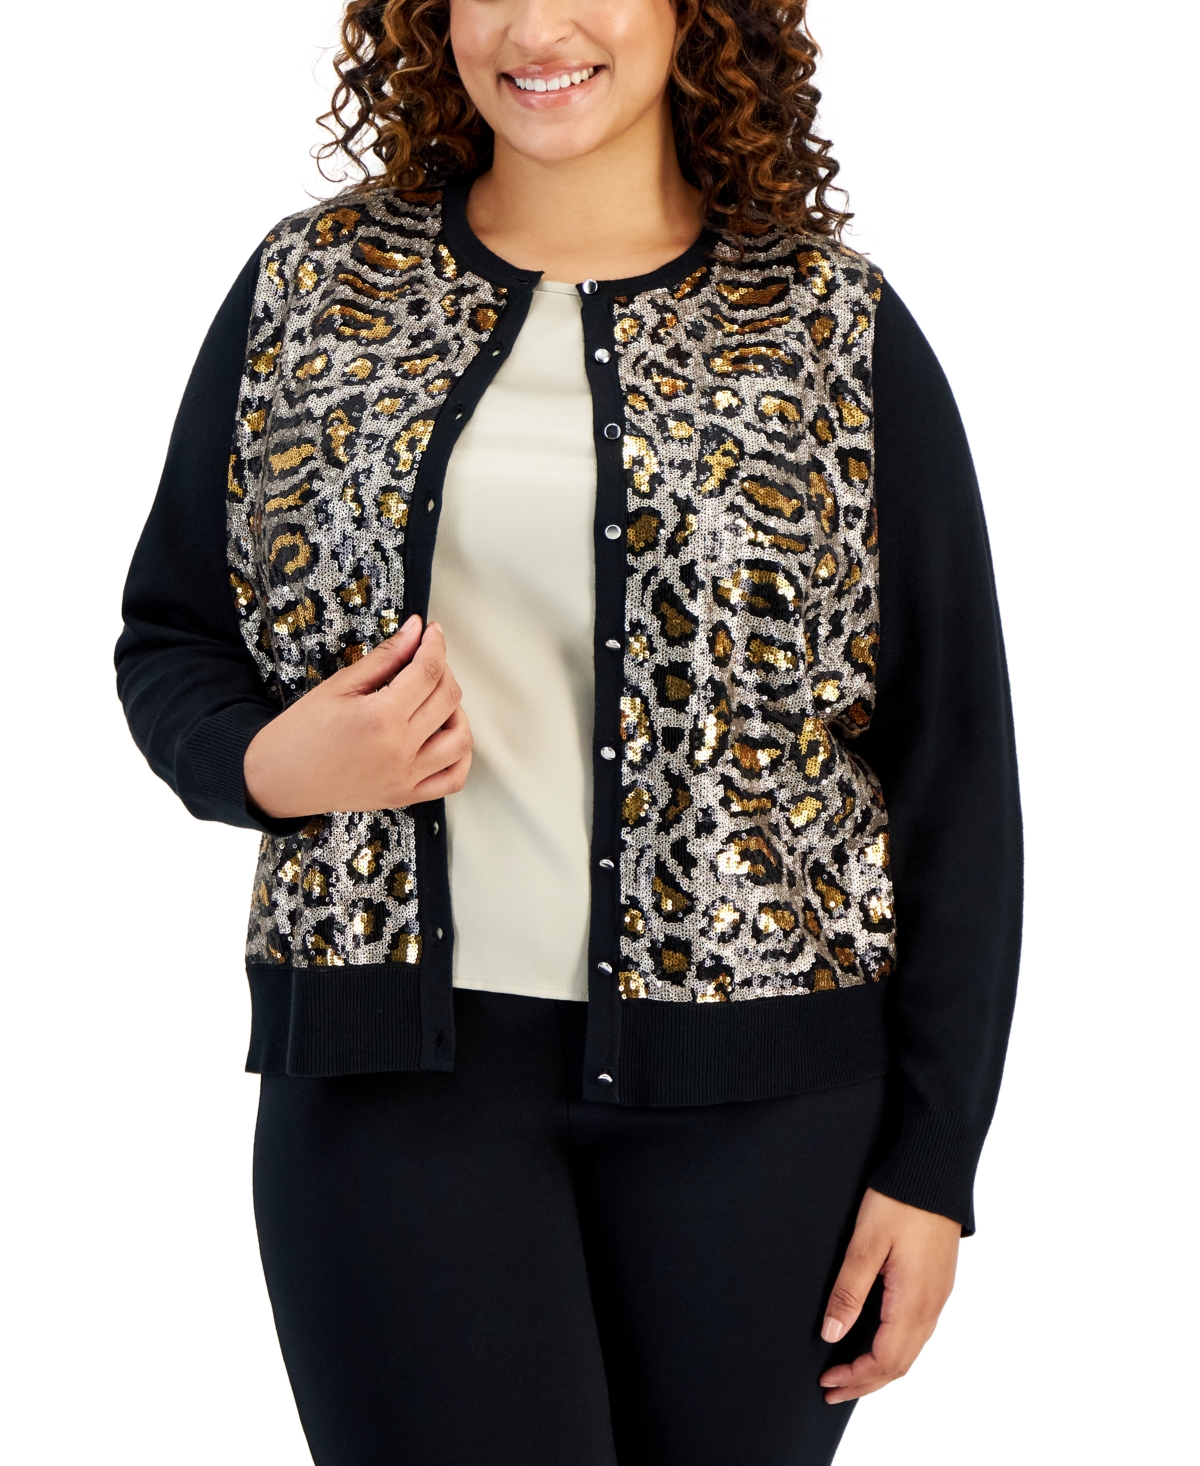 Jm Collection Plus Size Leopard Sequin Cardigan, Created for Macy's